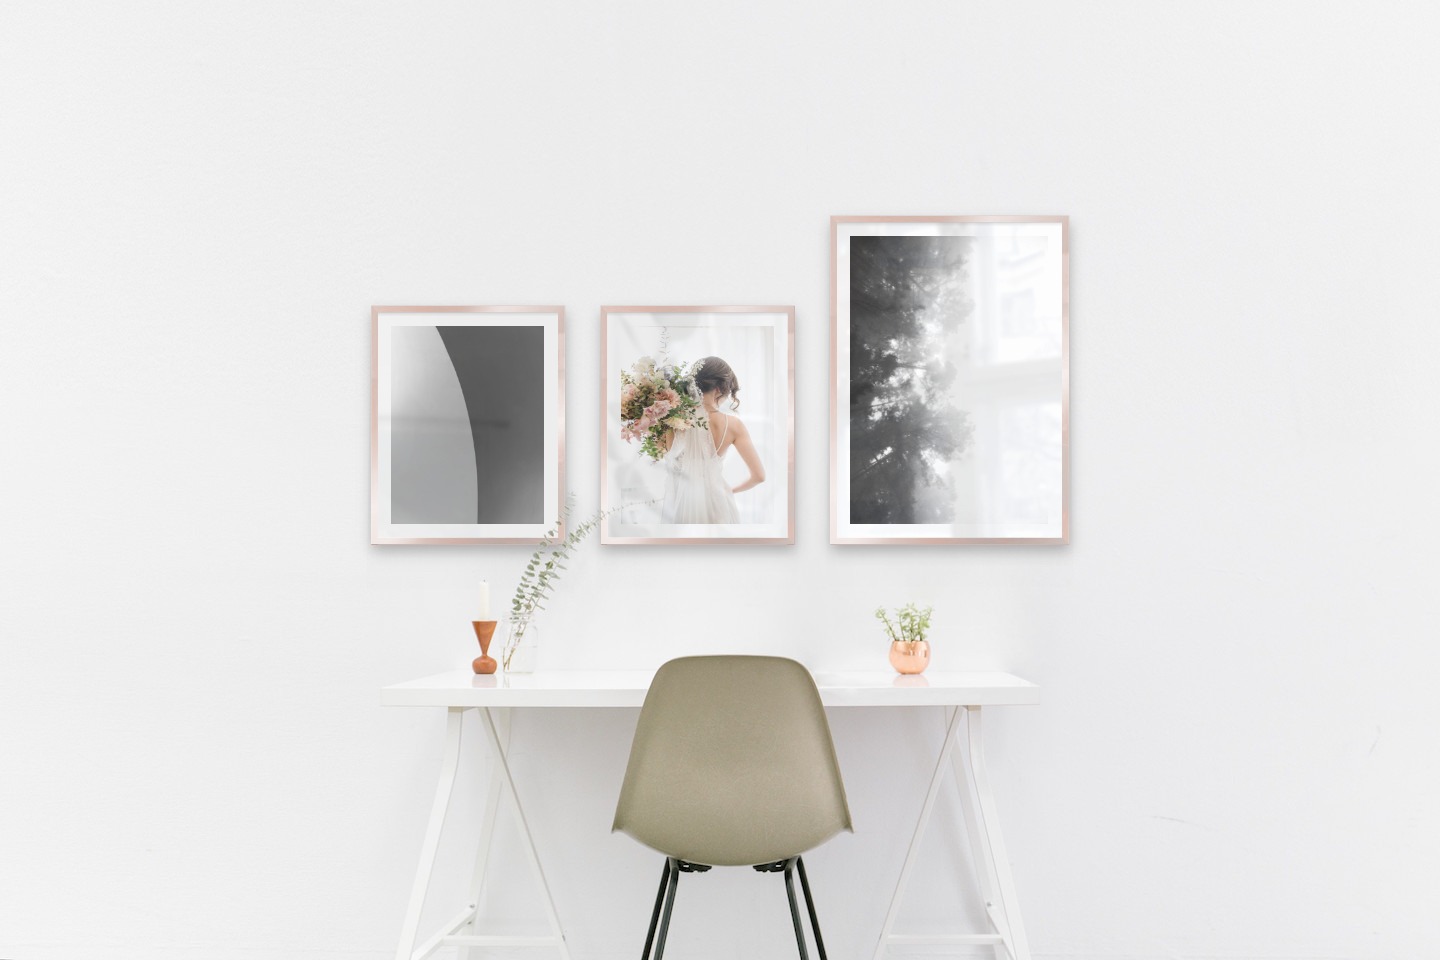 Gallery wall with picture frames in copper in sizes 40x50 and 50x70 with prints "Line", "Bride and flowers" and "Foggy wooden tops from the side"